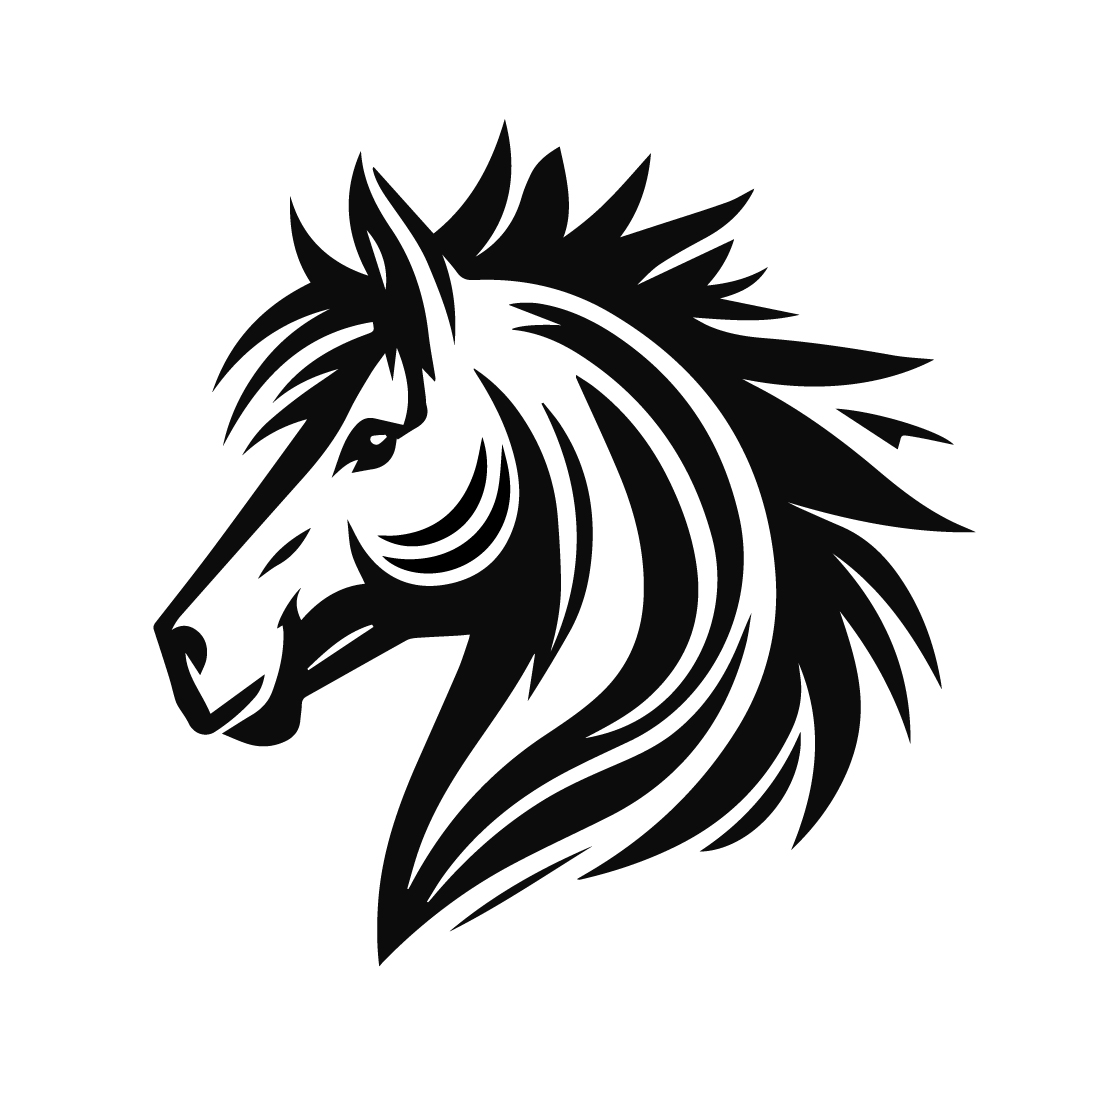 black and white clipart horses